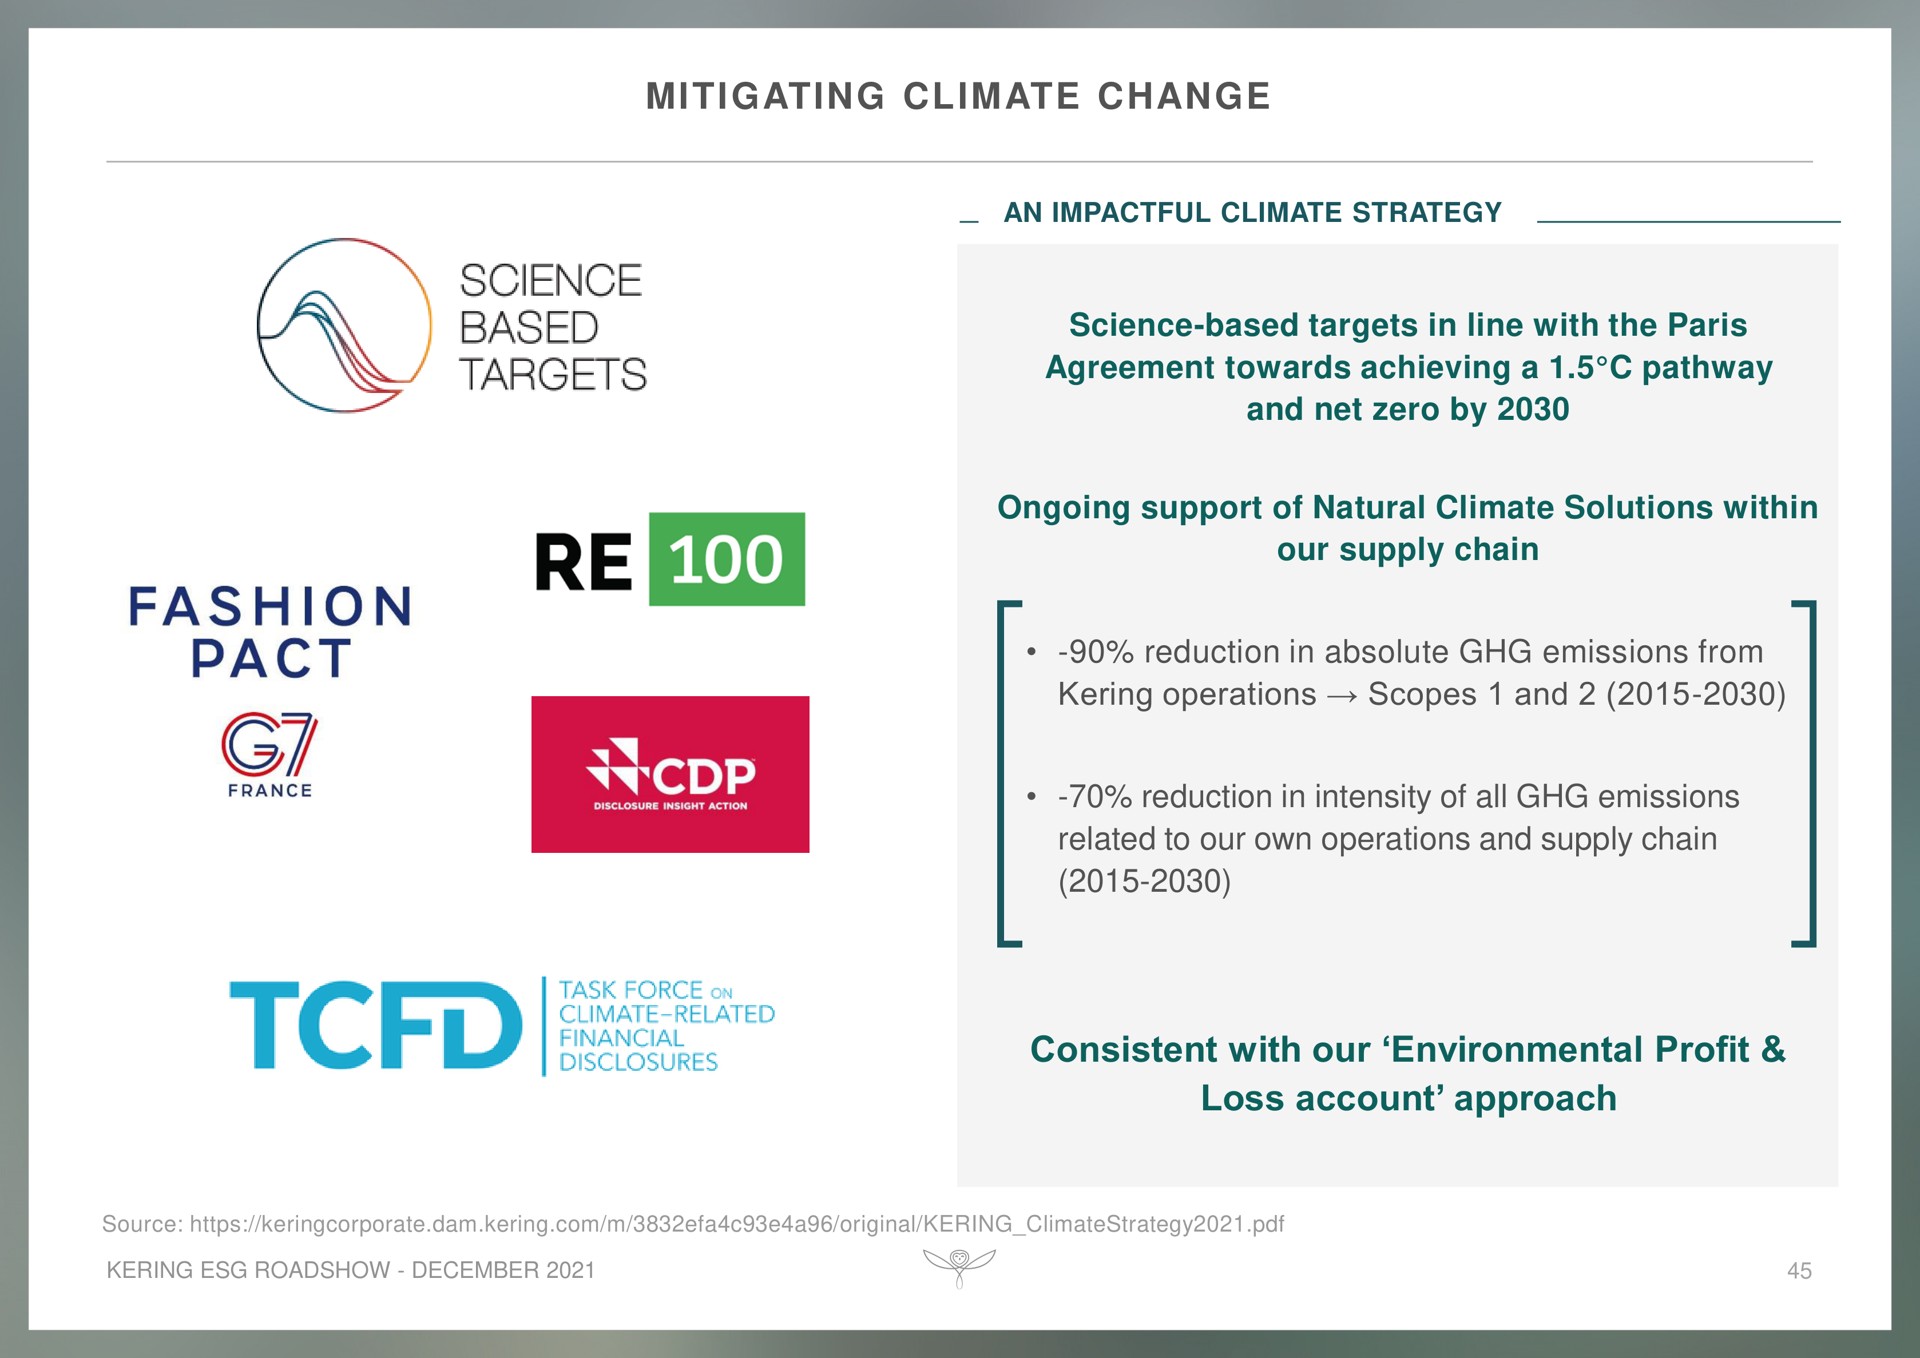 mitigating climate change consistent with our environmental profit loss account approach science based targets fashion pact | Kering